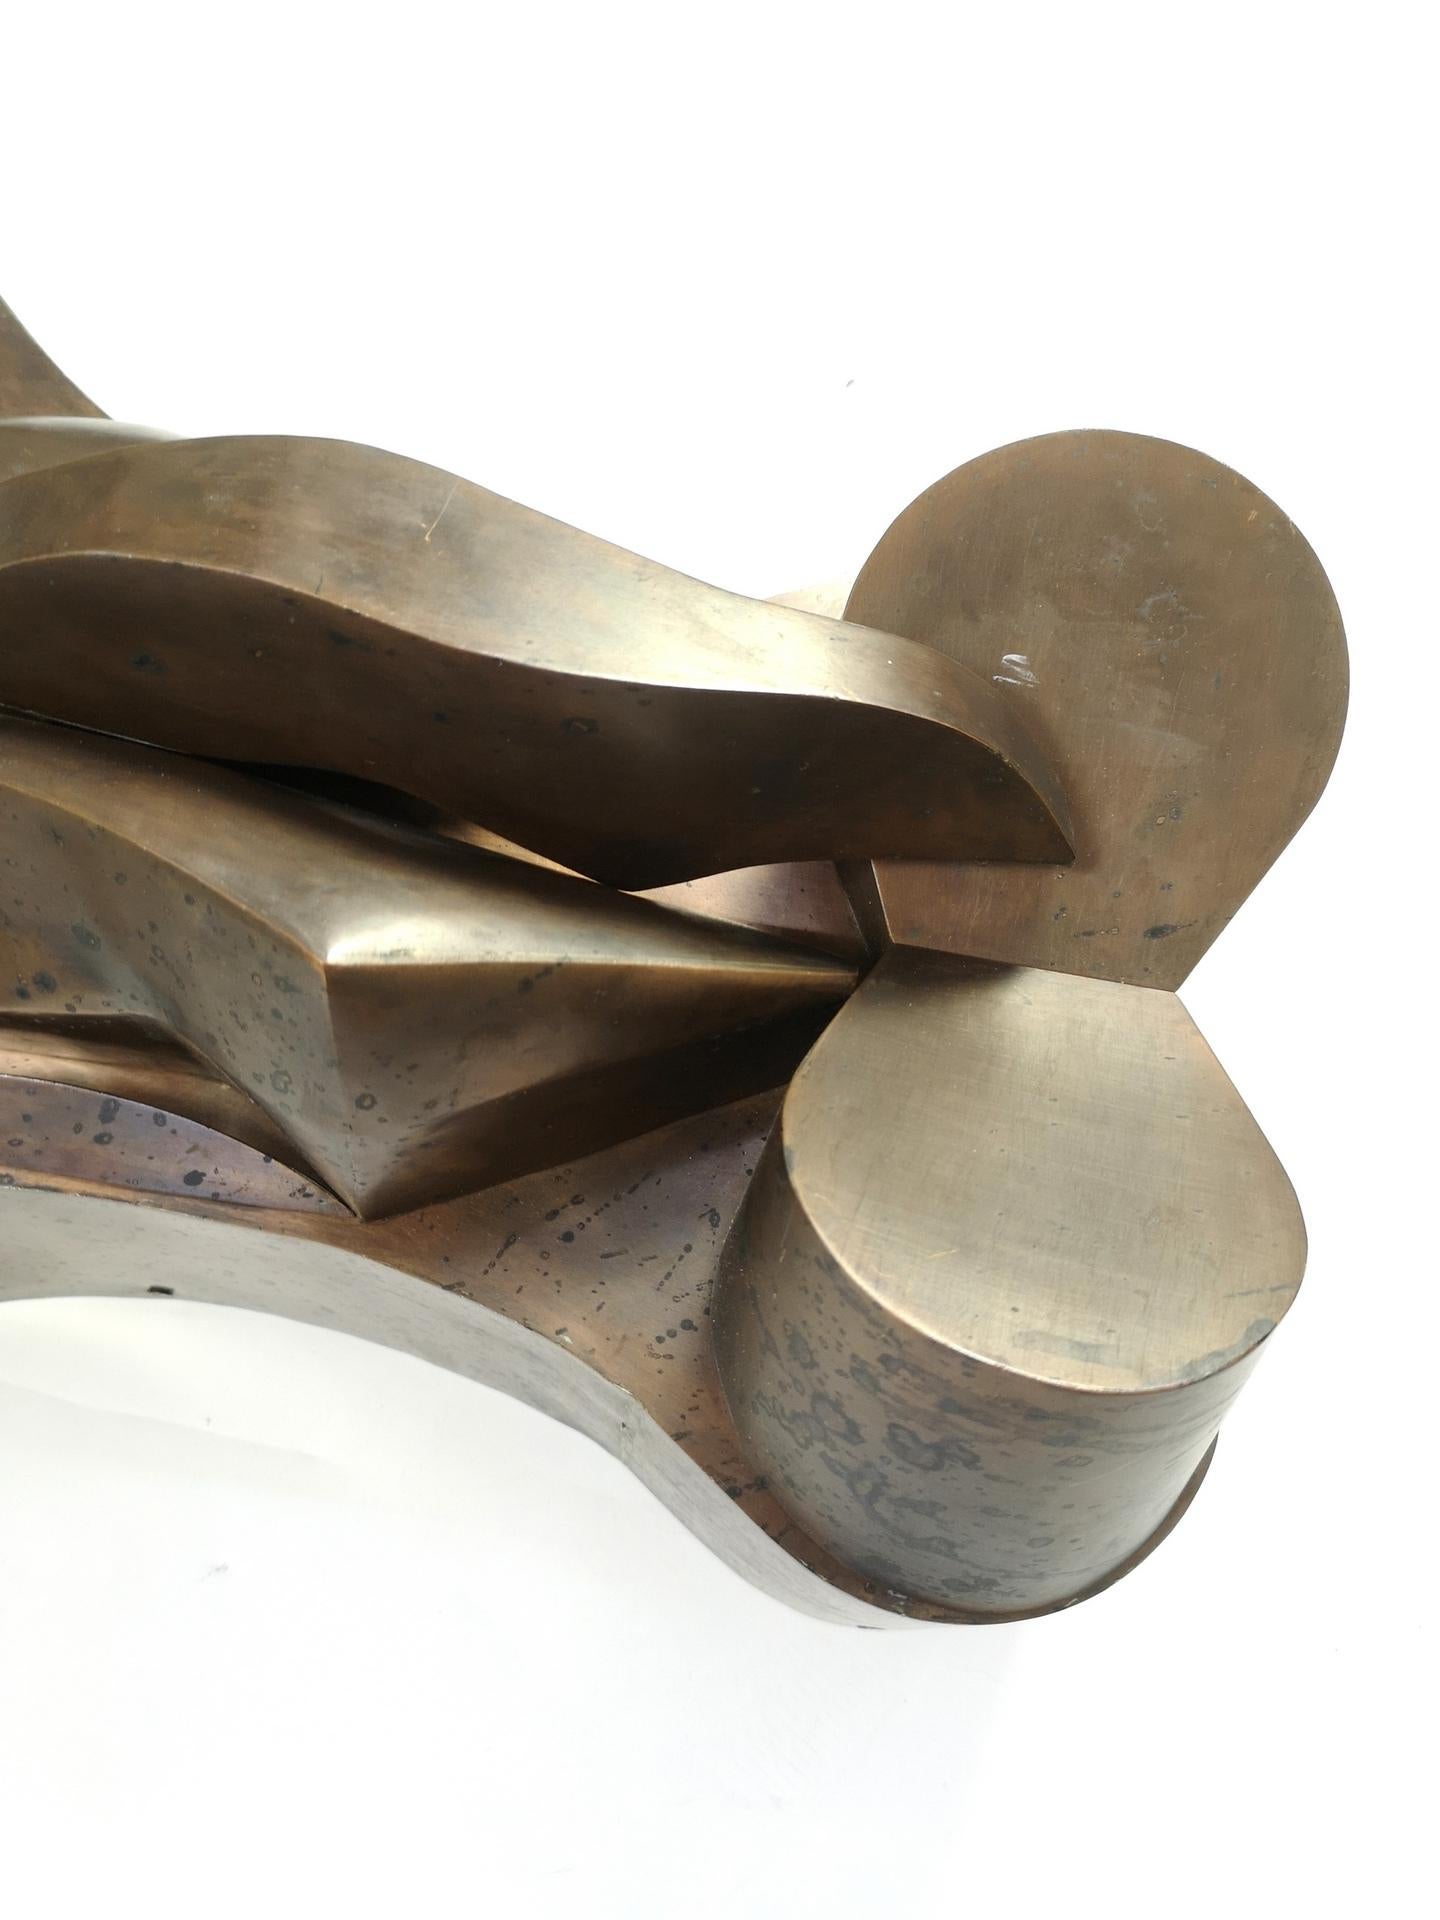 Large organic modern brutalist copper sculpture by Kozsuharov Ognjan. This brutalist piece was made in the 1970's by Ognjan.
He studied on the Hungarian Arts Academy in 1973, graduated as a sculptist. His work as a sculptist is strongly influenced